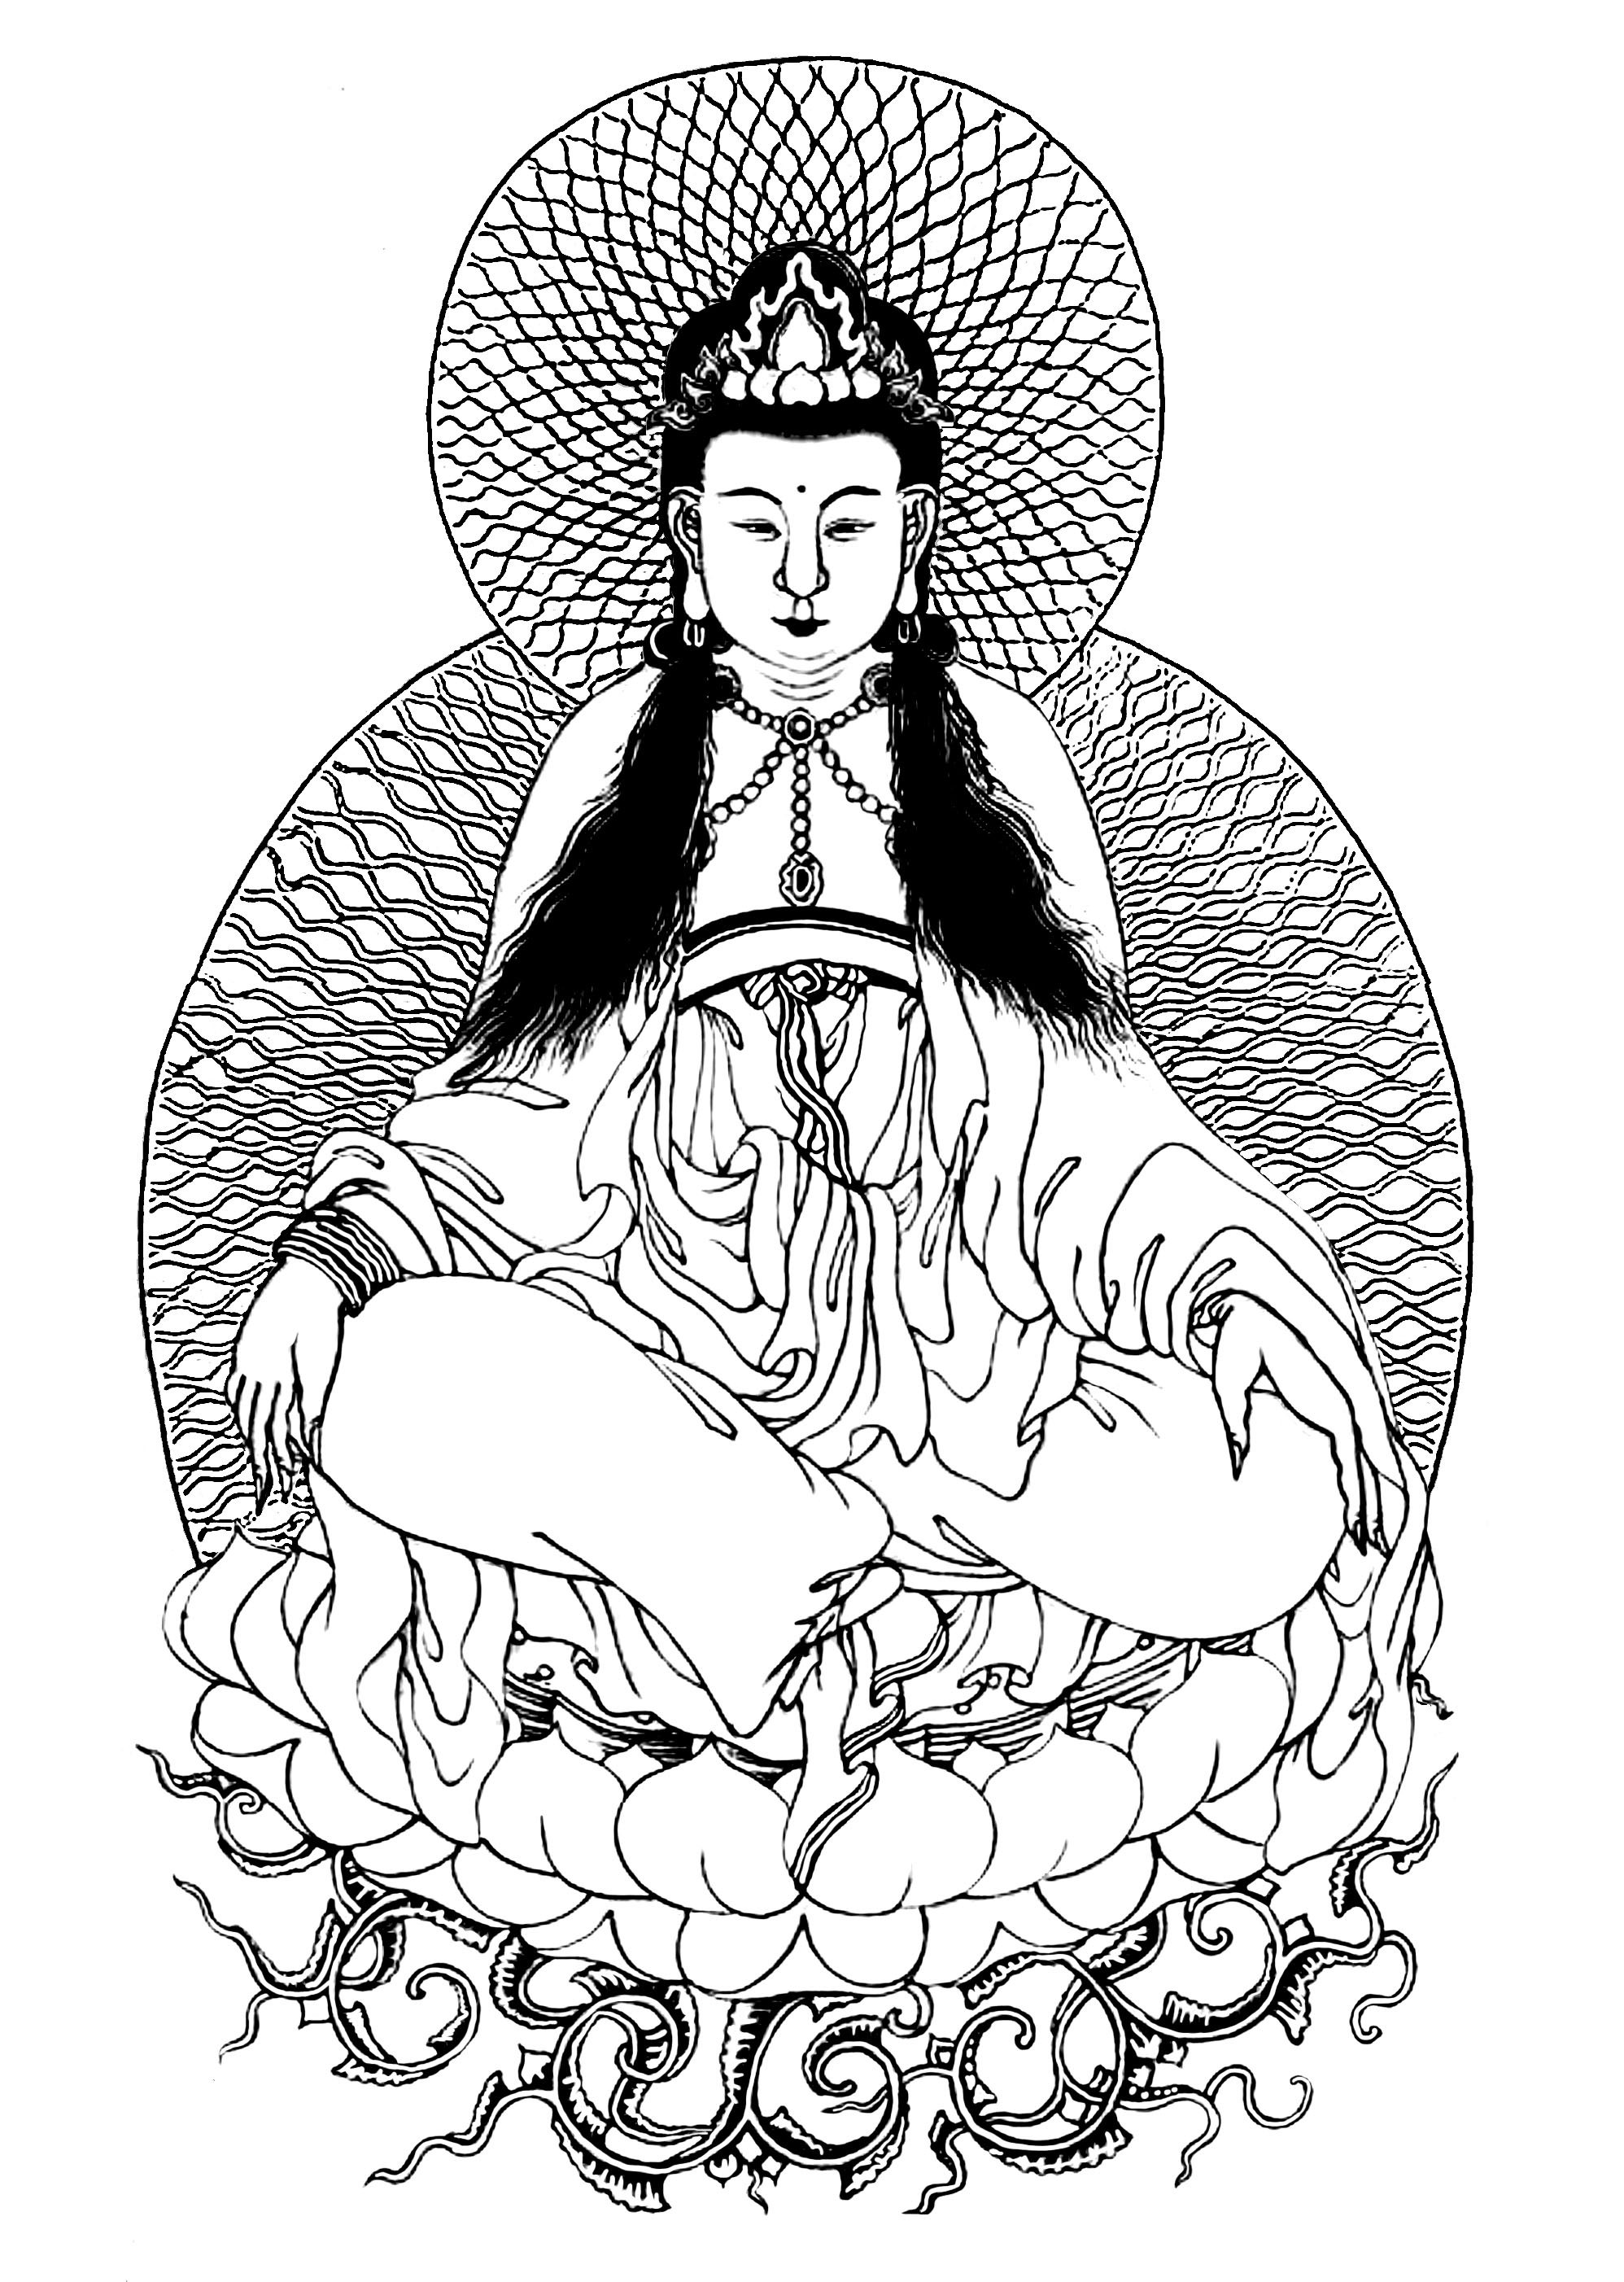 Guanyin : Buddhist goddess of Mercy (inspired by a painting by Xingru Wang)